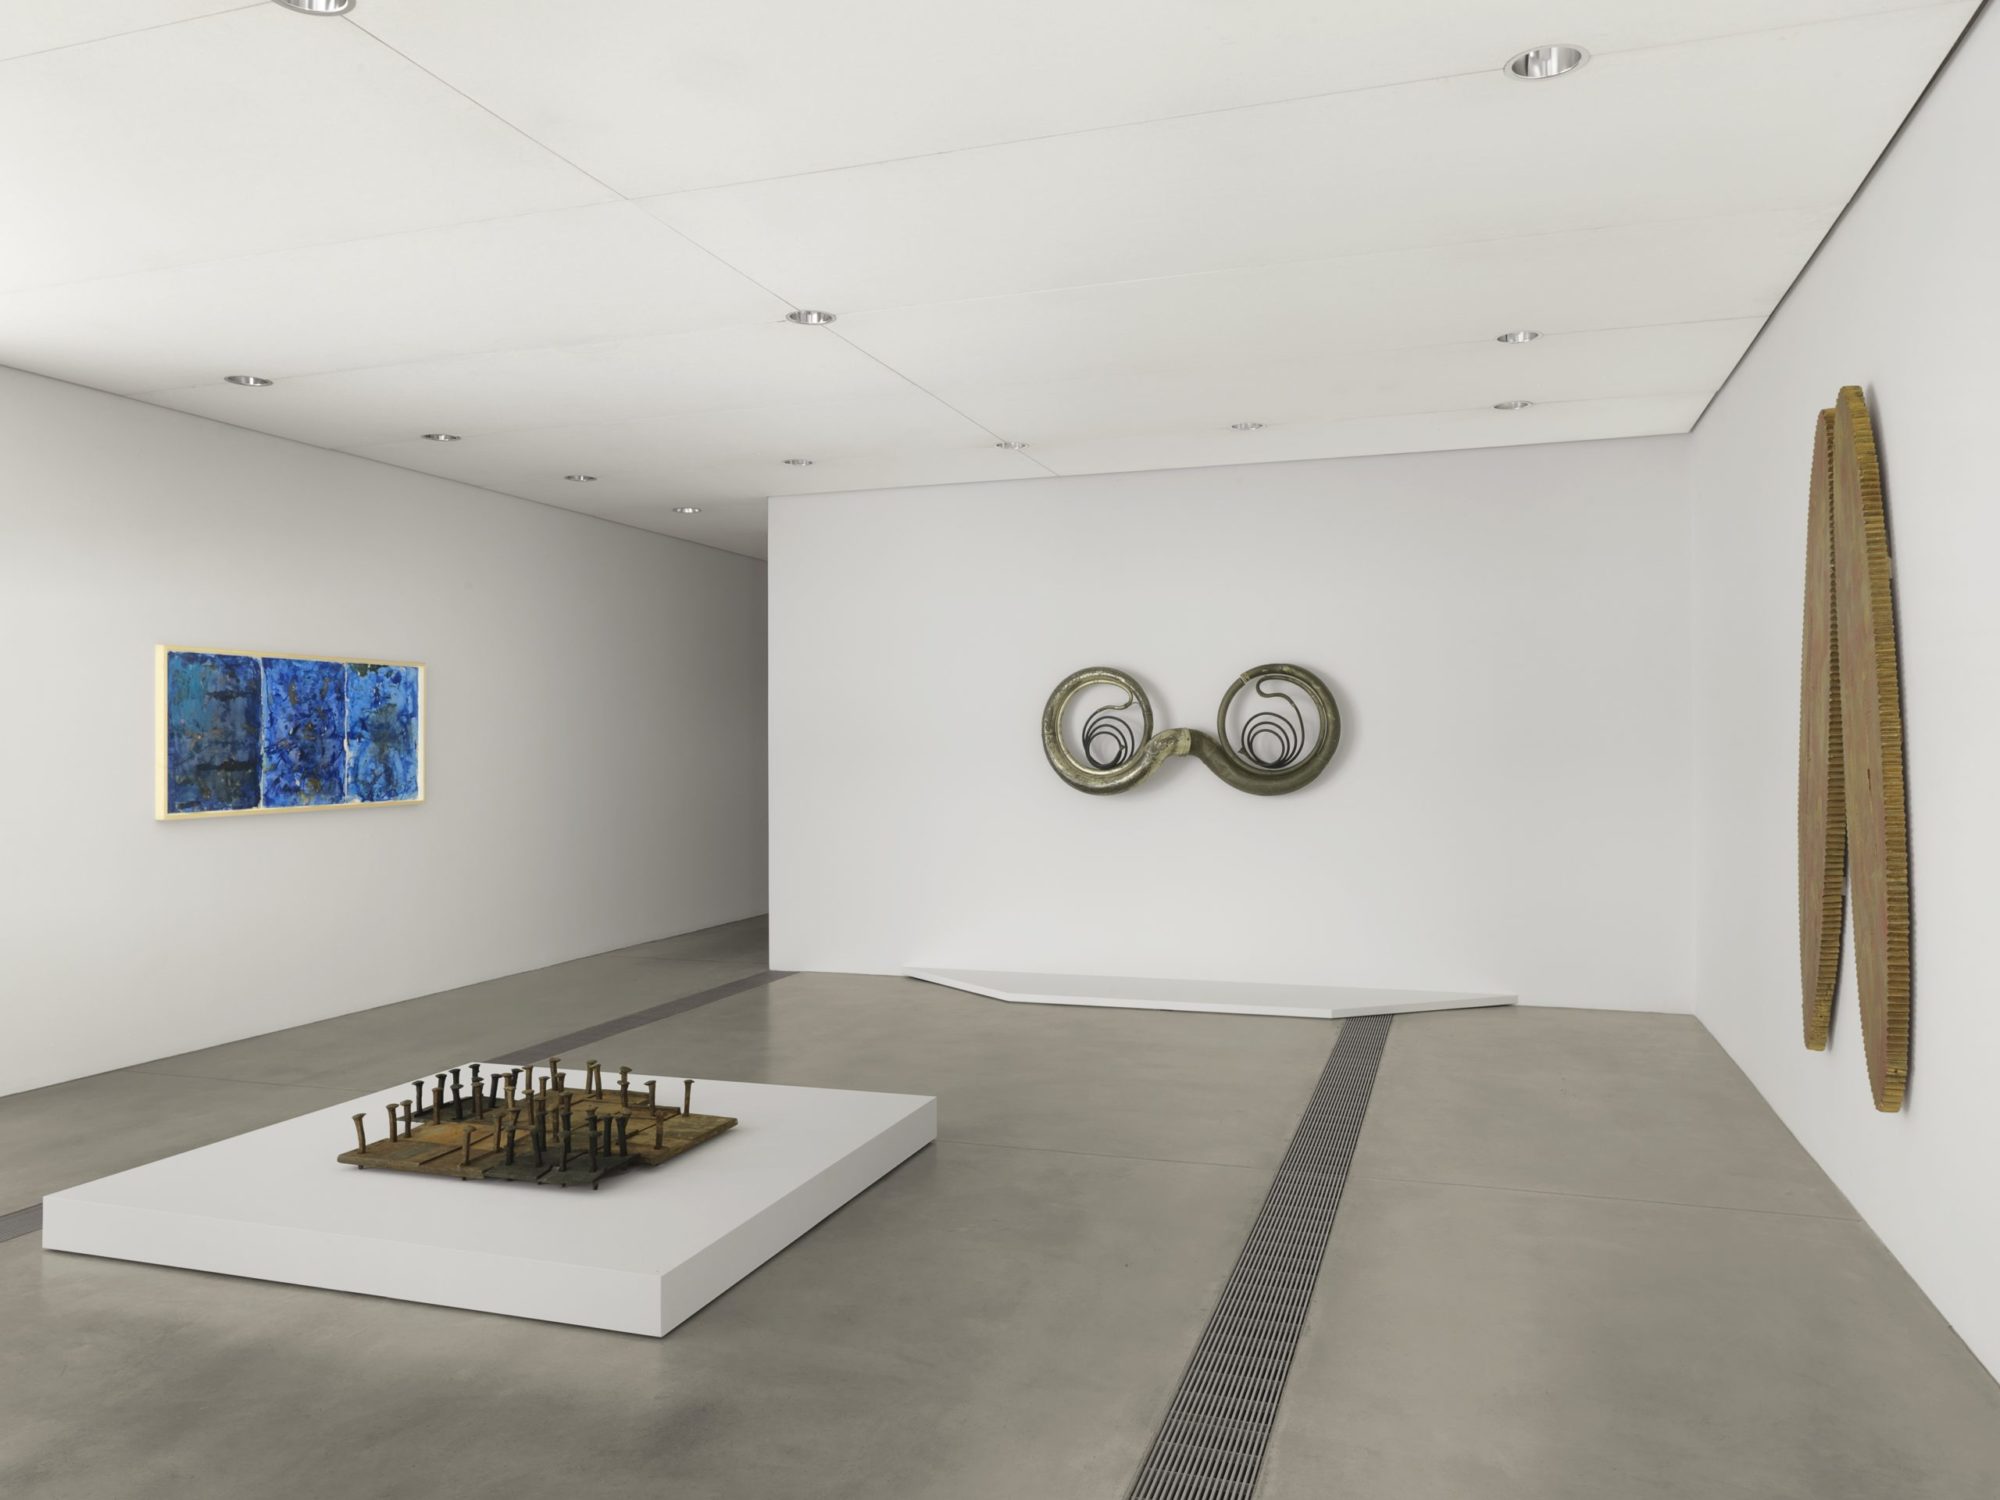 There are four visible artworks displaced. On the front facing wall is a pair of metallic bells attached to each other forming an ouroboros. On the left wall is a blue three-paneled abstract paintings that are framed in light wood. On the low center podium is a collection of steel nails that are back and brown facing downward. The nails are standing on patches of black and brown steel. On the right wall hangs a mvet (pair of connected oval shaped pieces of wood).